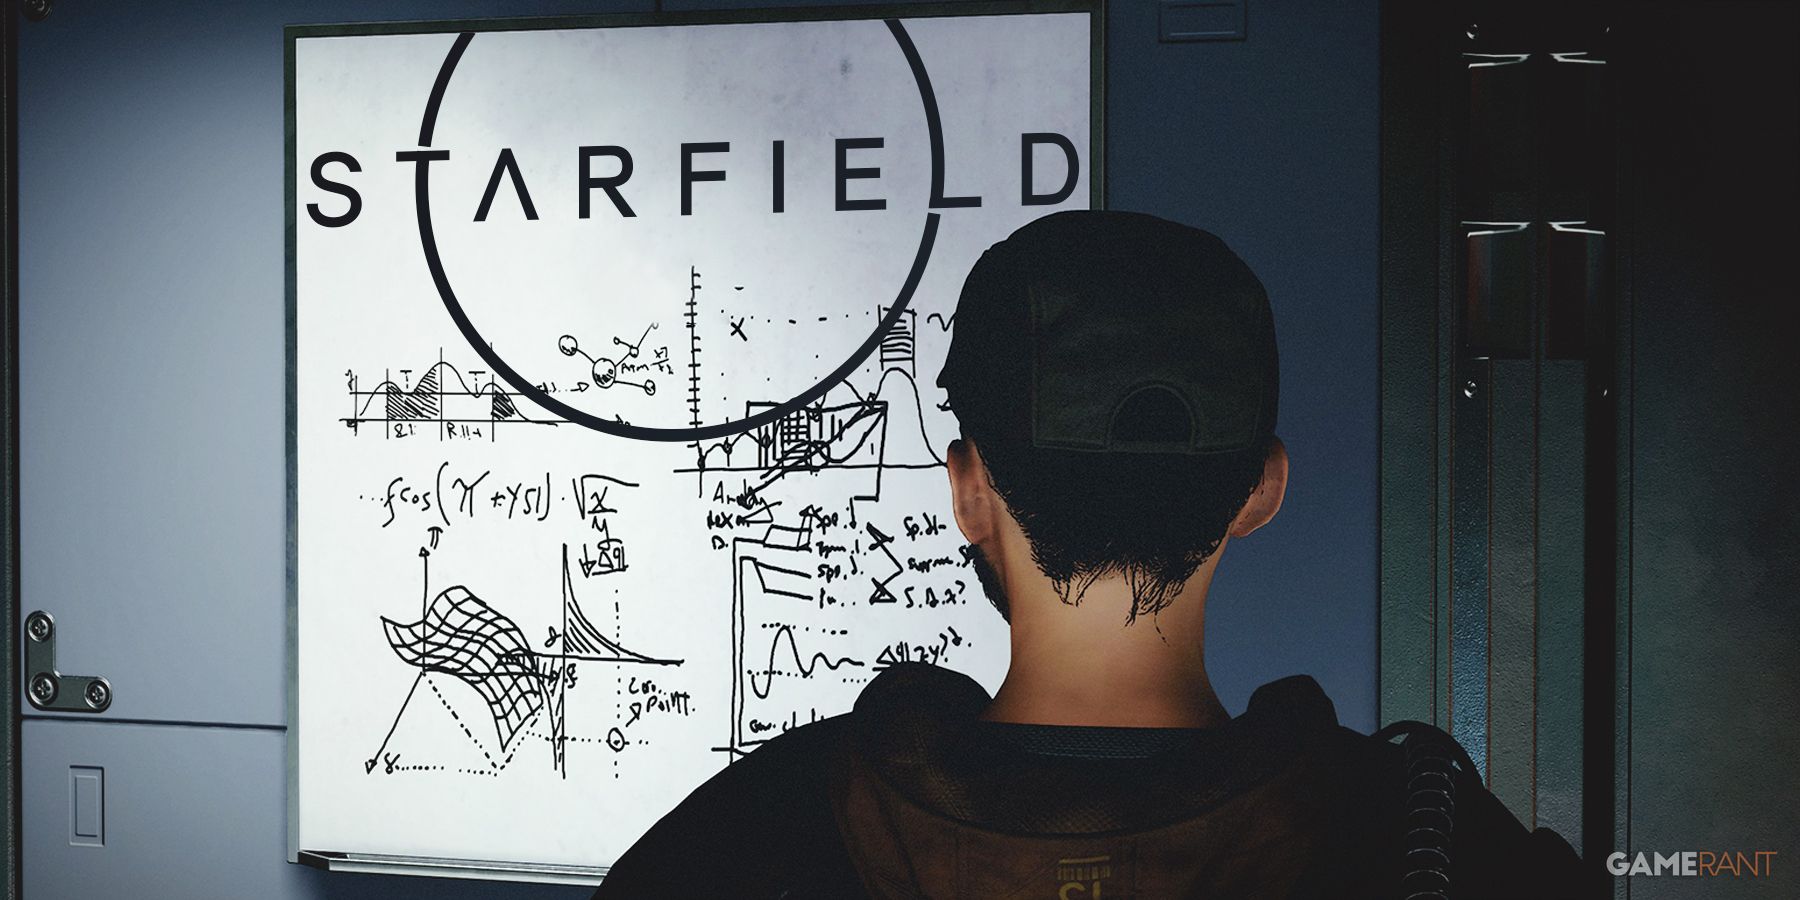 Starfield character looking at complex schematics whiteboard with game logo